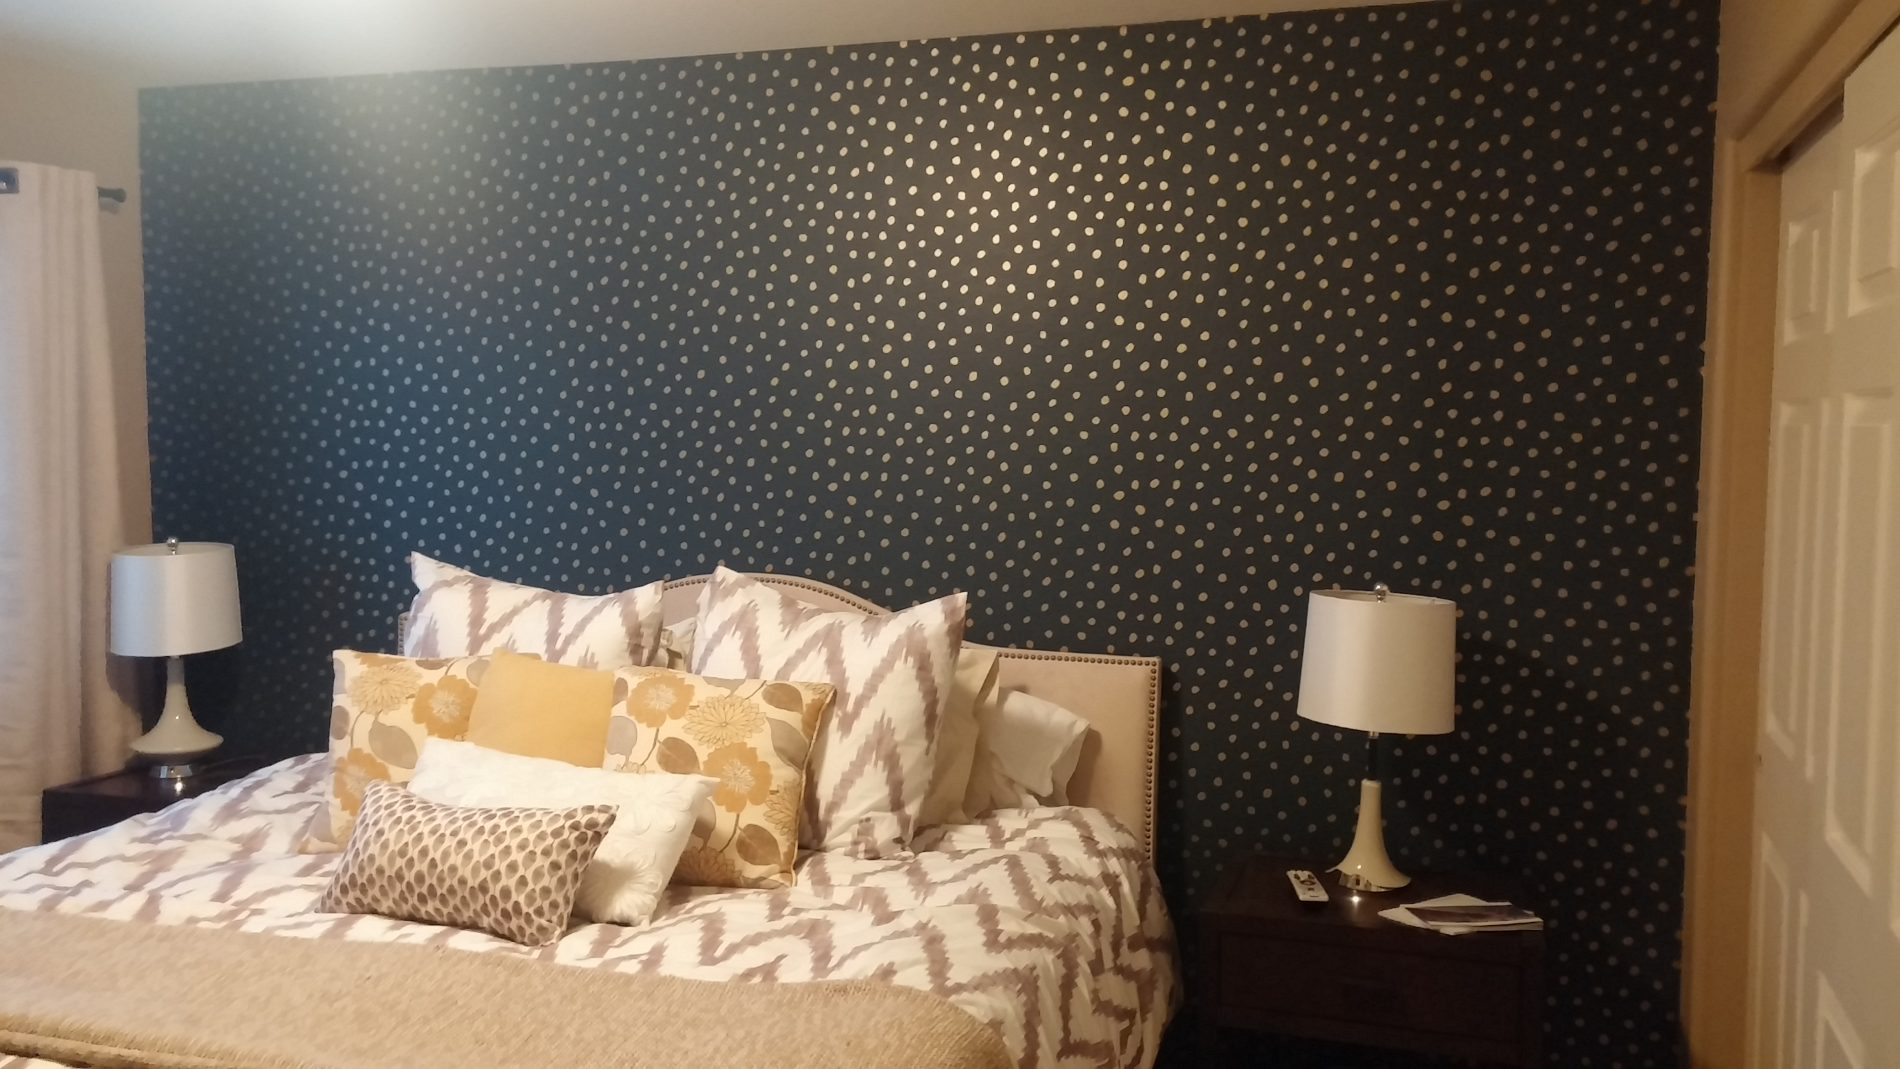 Residential wall covering services